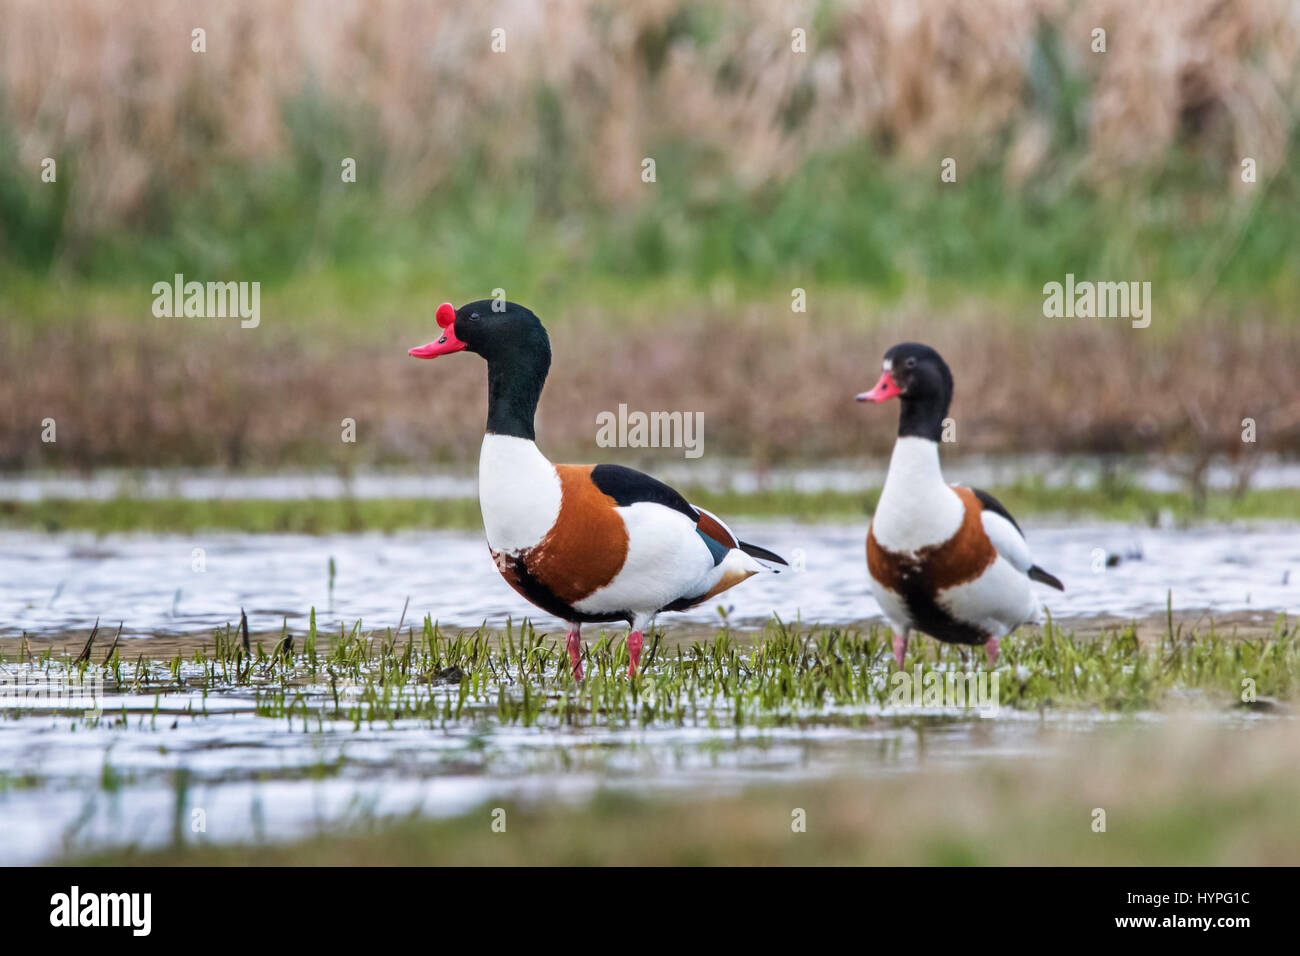 Common shelduck (Tadorna tadorna) pair, male and female foraging in shallow water of saltmarsh Stock Photo